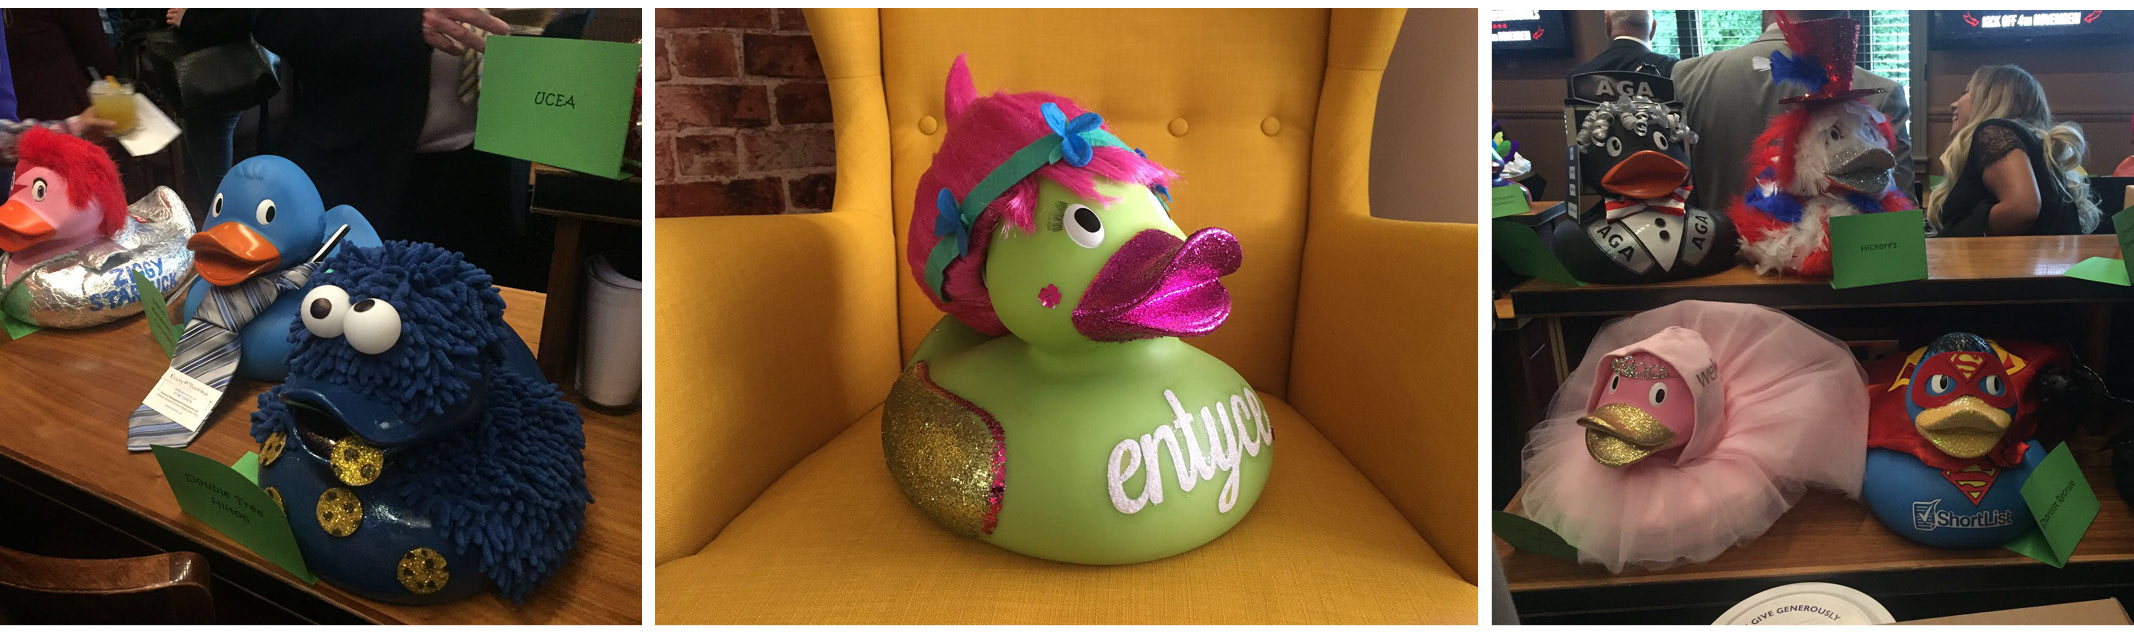 Entyce support the Countess Charity with Poppy the duck